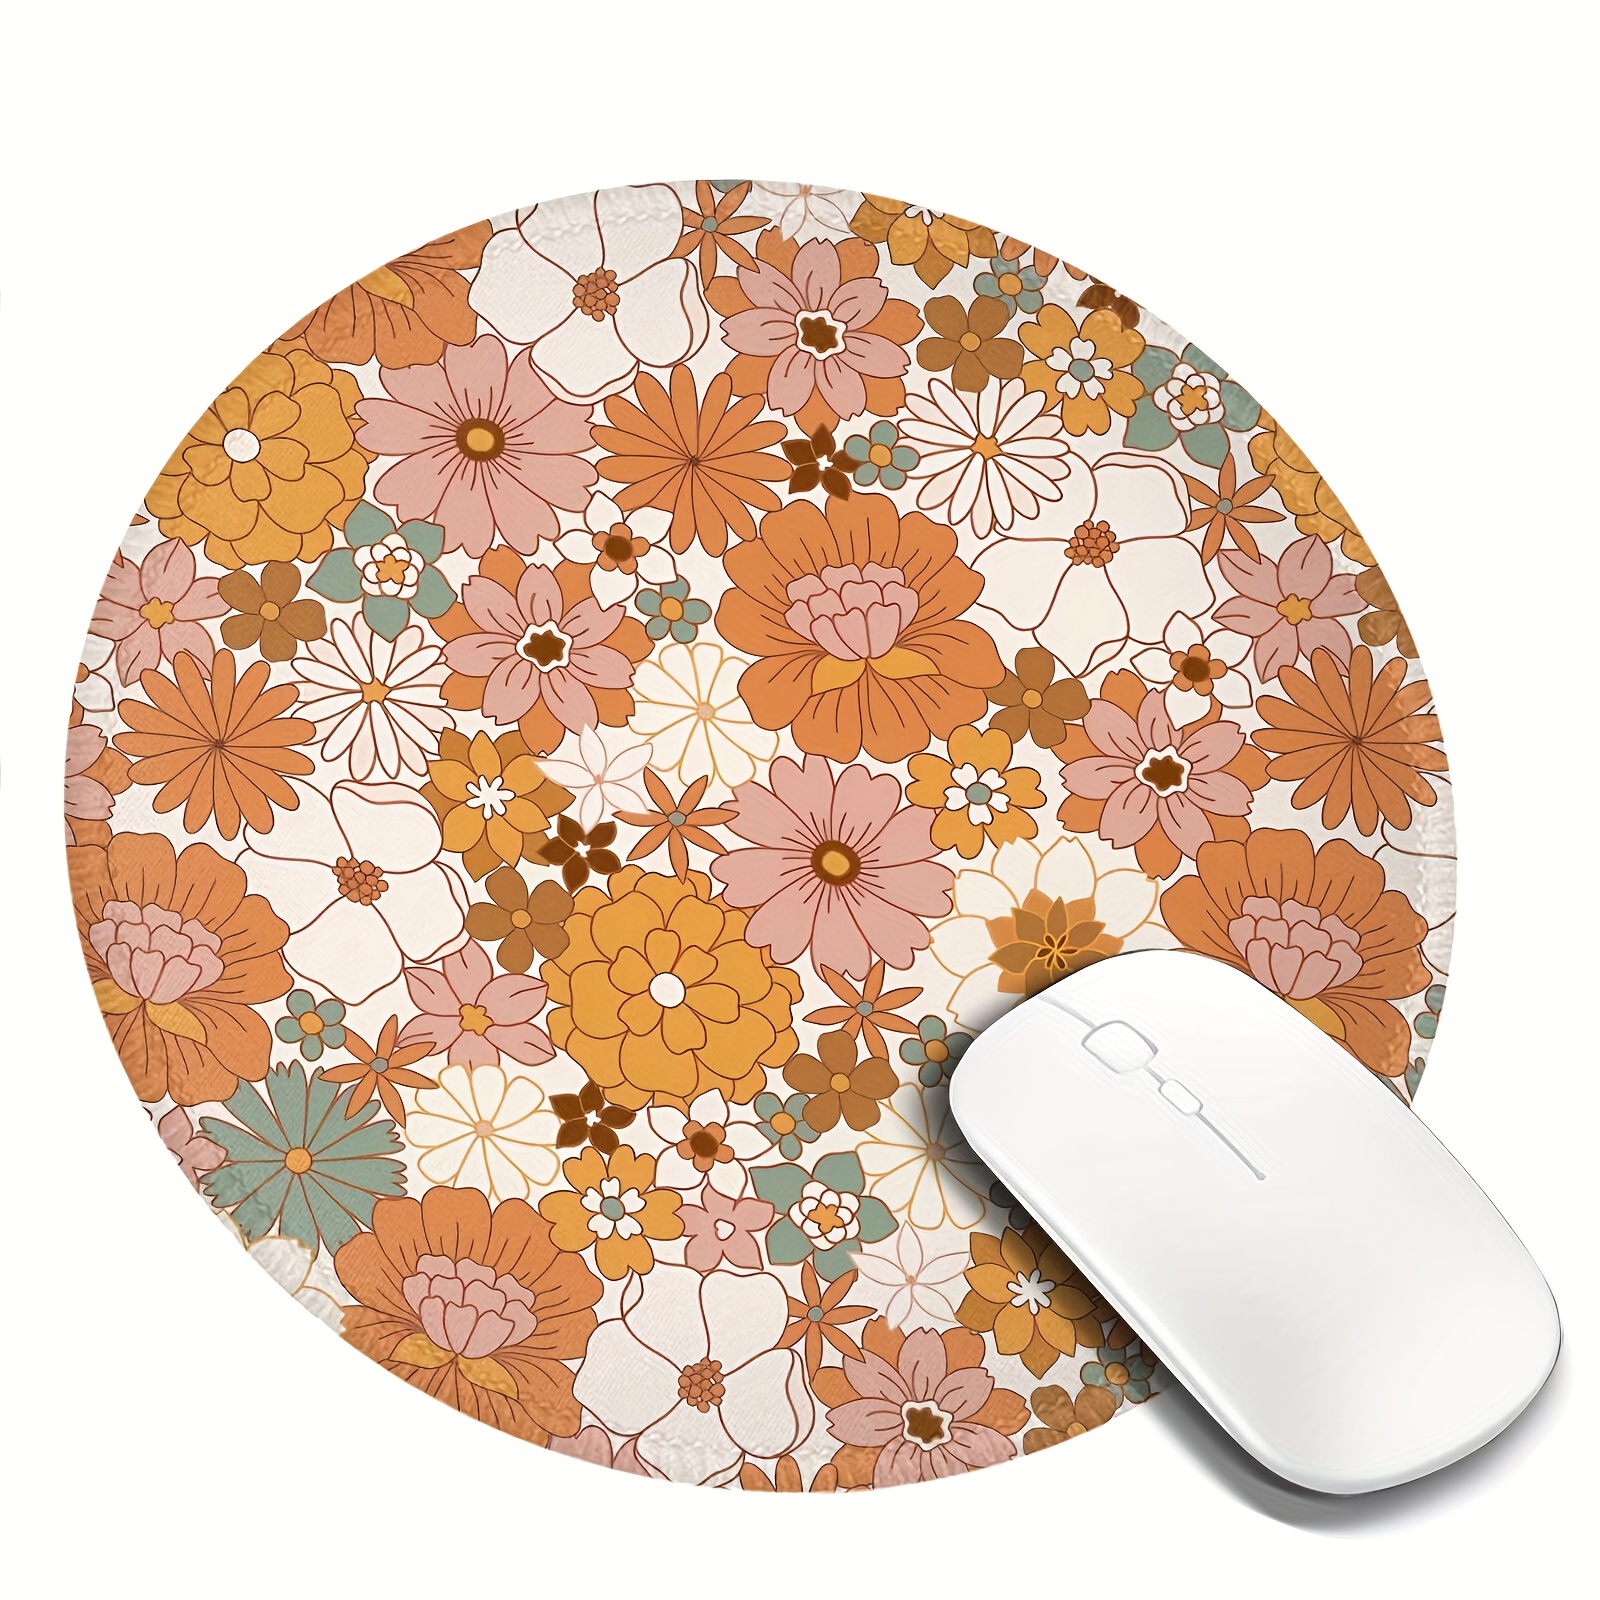 Floral Mouse Pad, Desk Accessories, Office Decor for Women, Funny